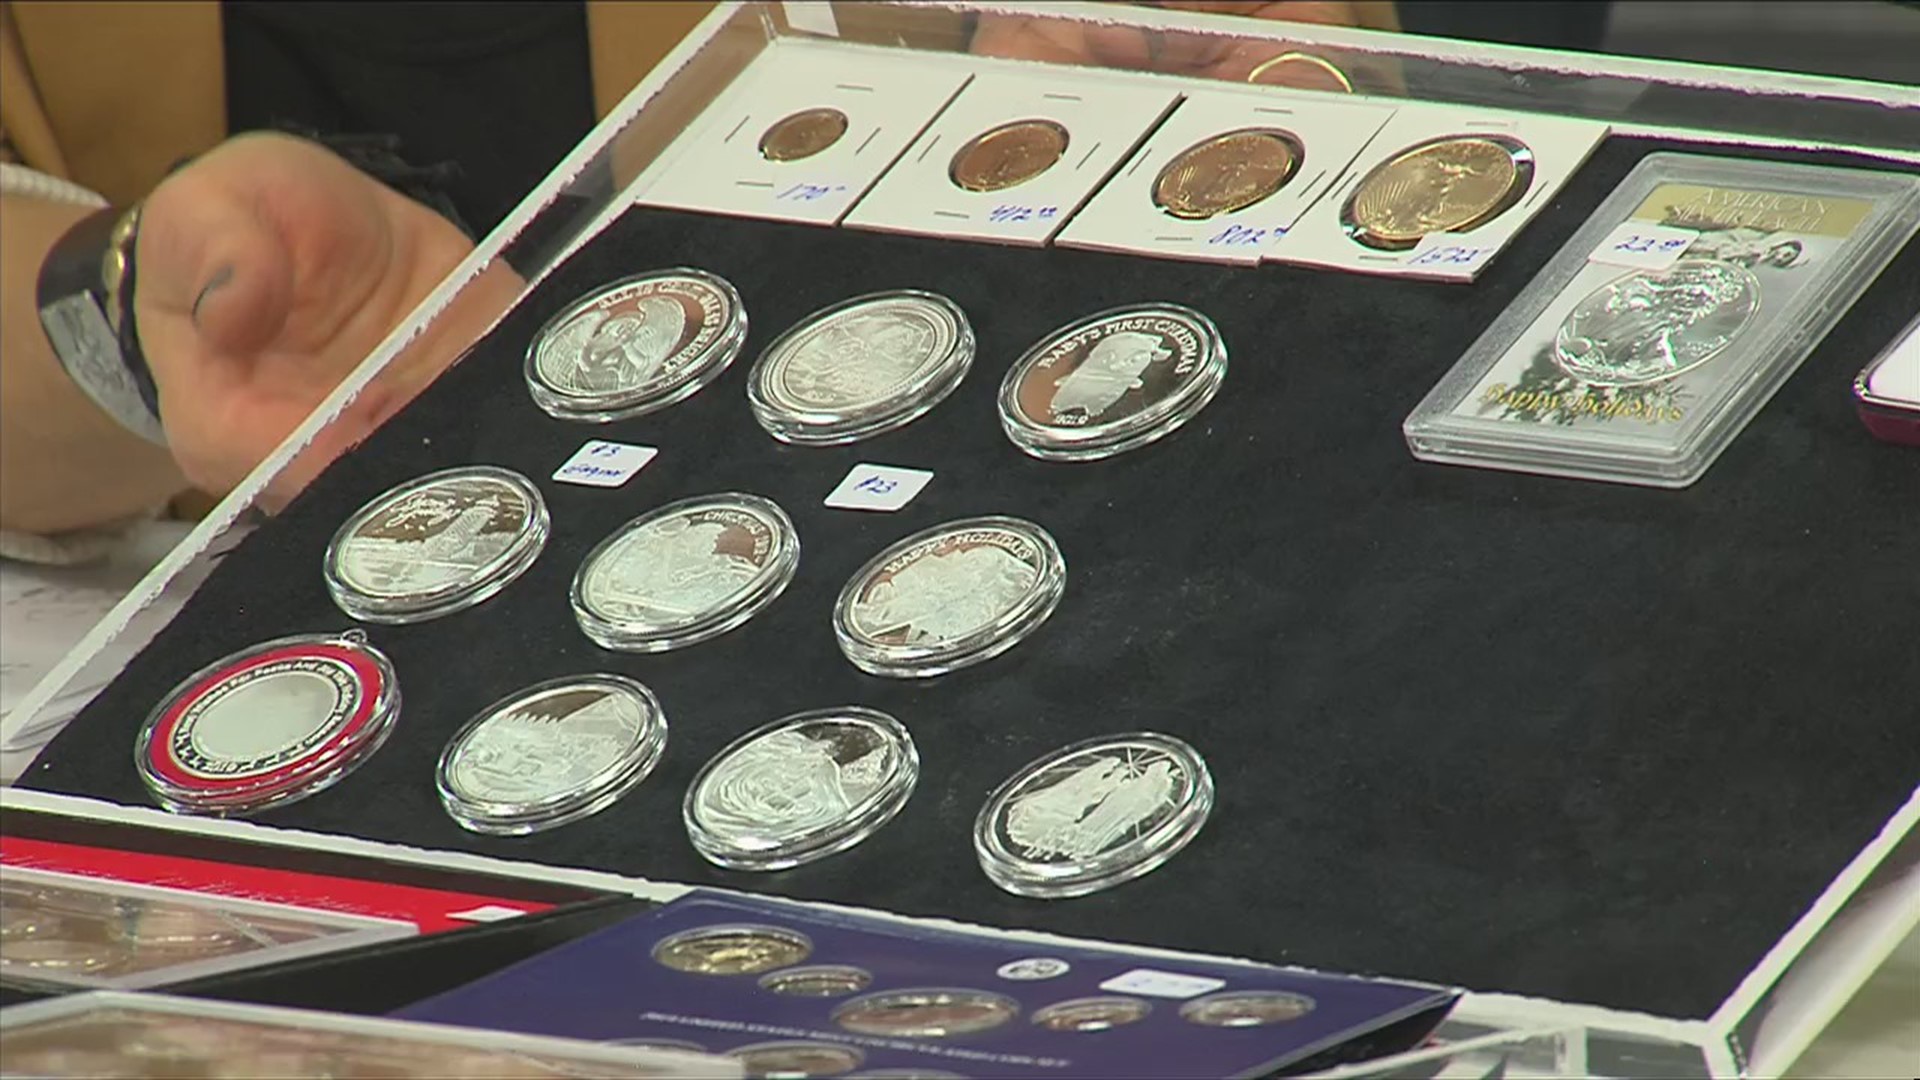 Gift ideas from Christopher's Rare Coins